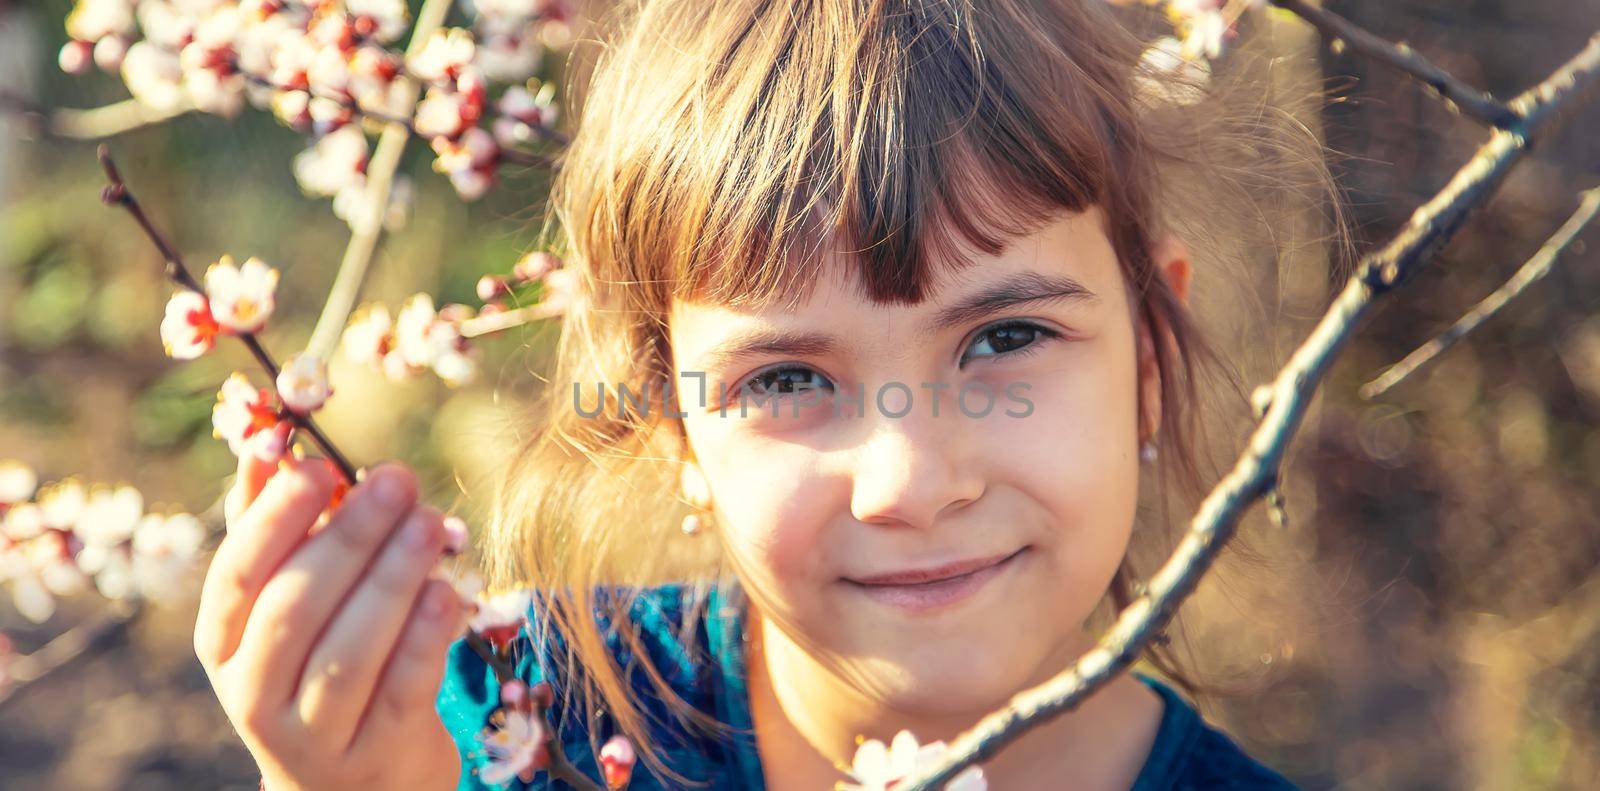 A child in the garden of flowering trees. Selective focus. Nature.